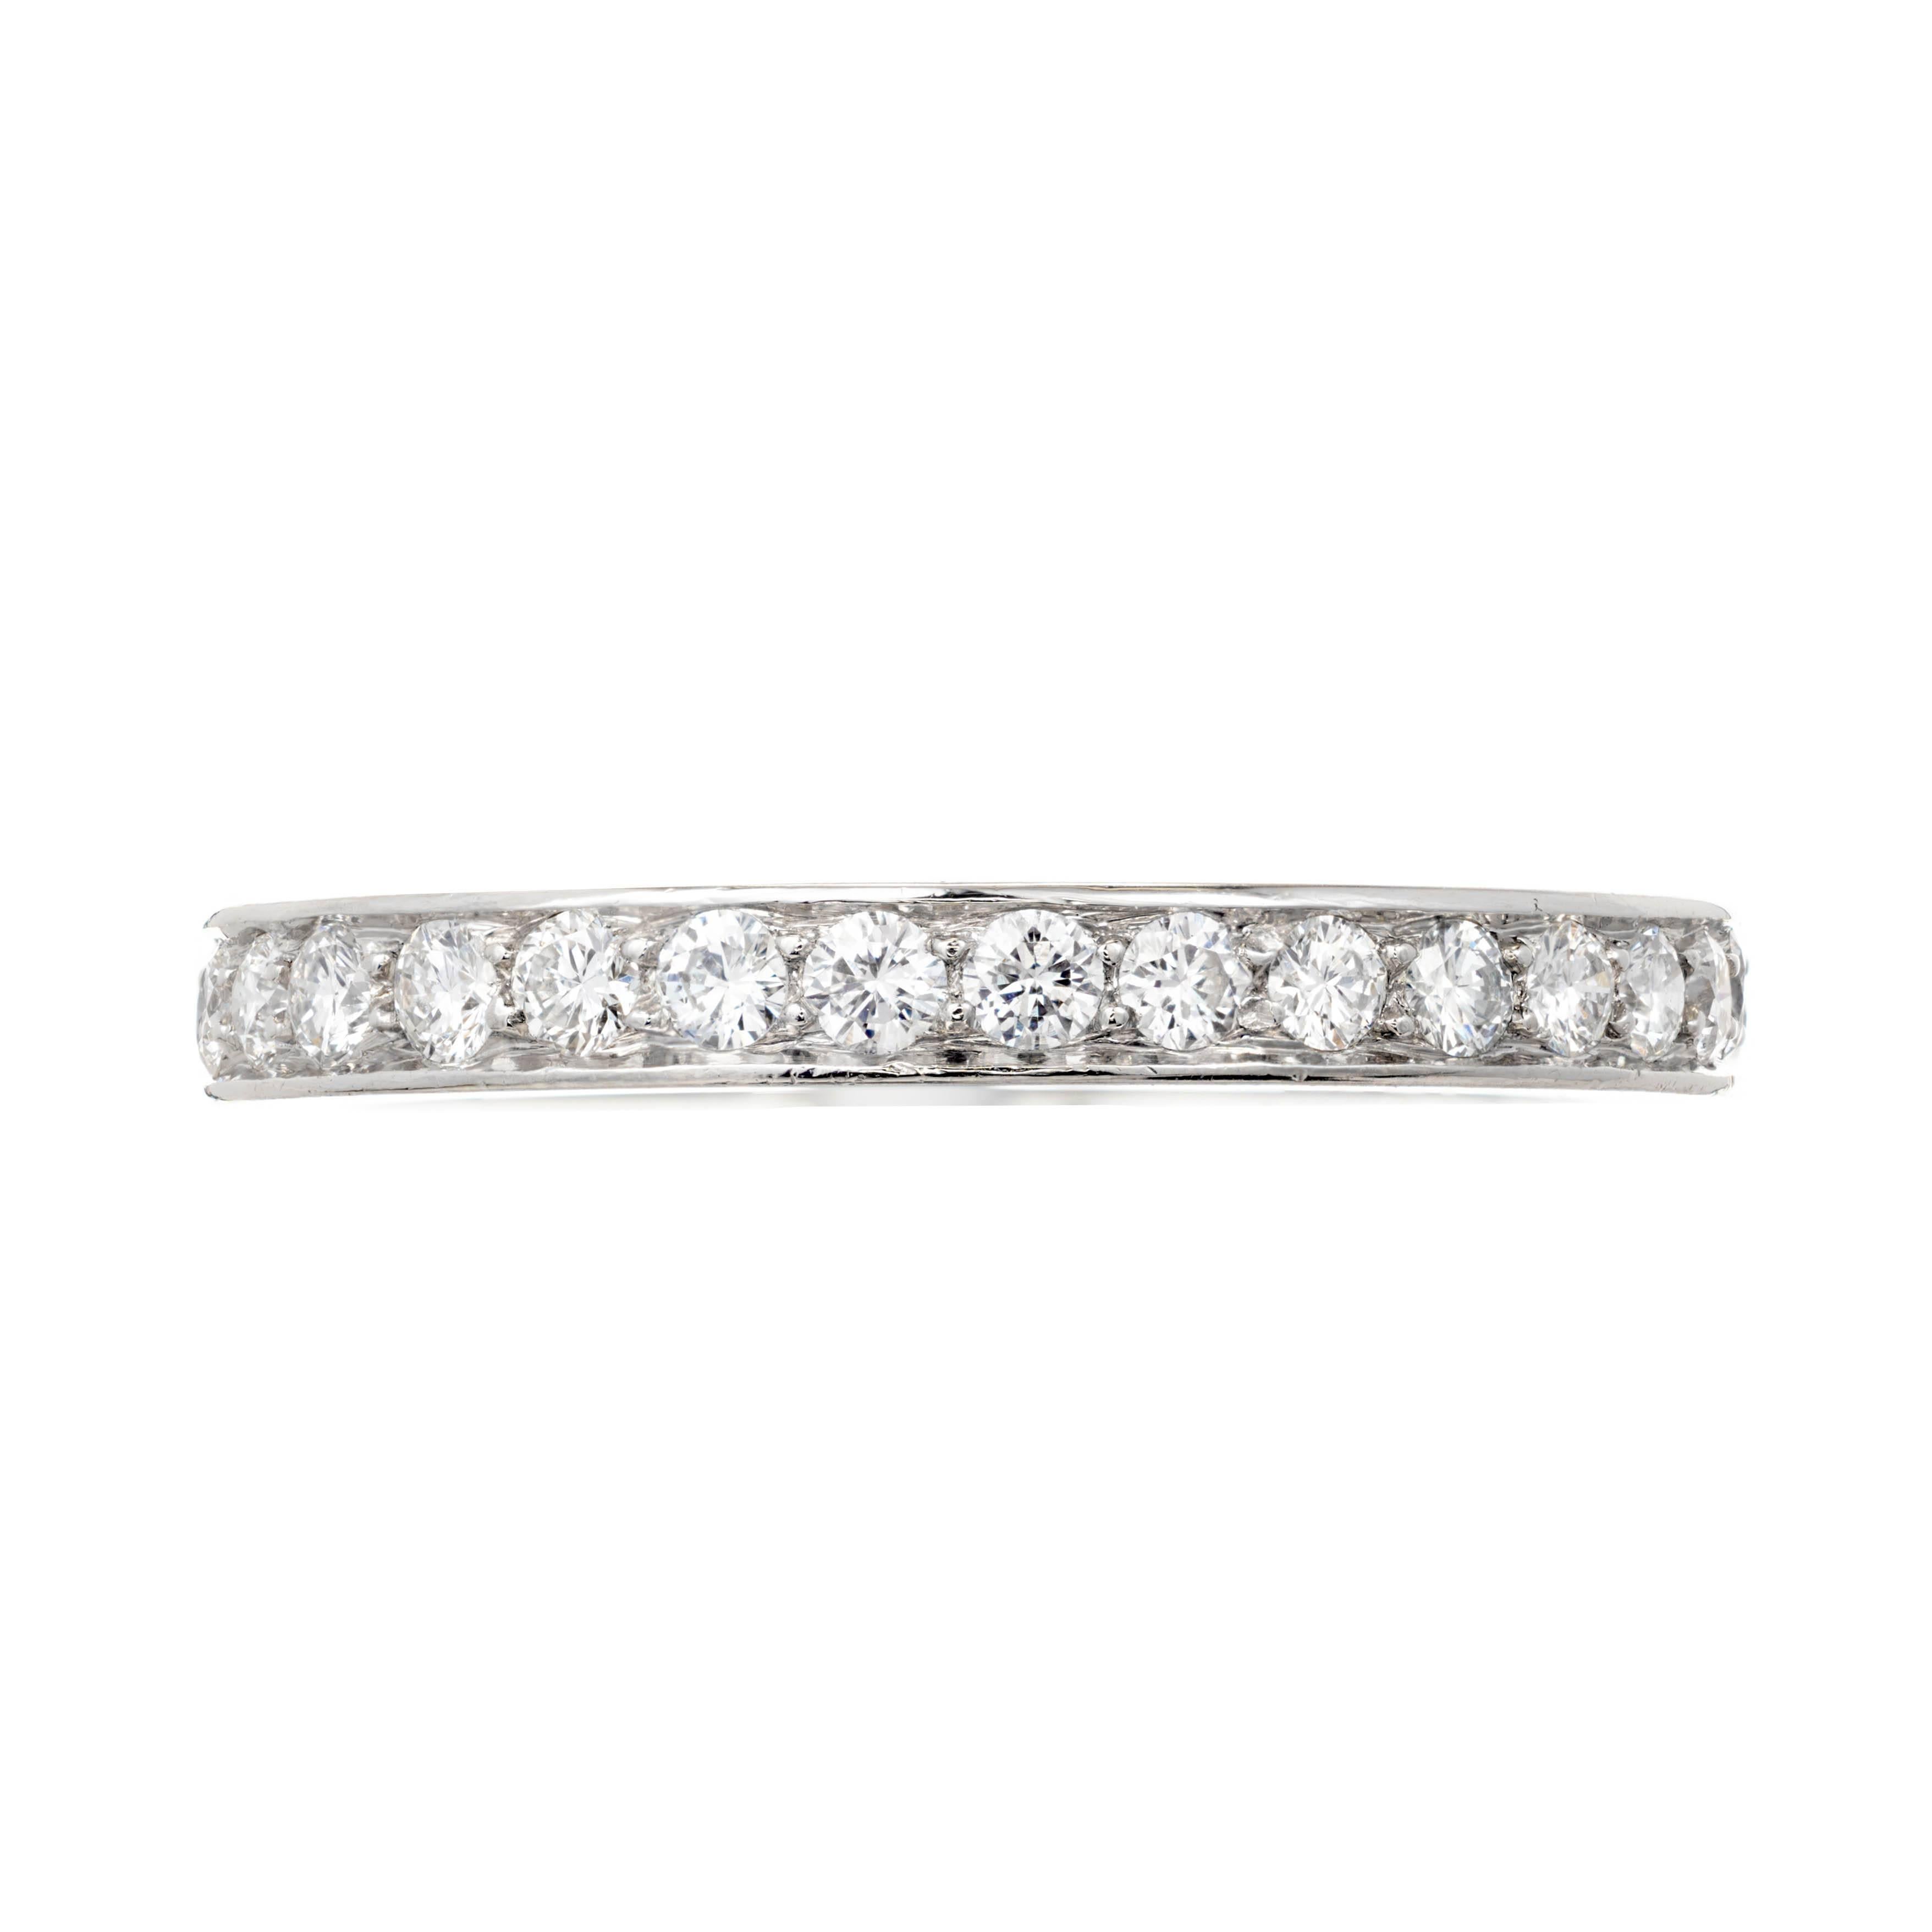 Tiffany & Co Legacy Bead Set Diamond eternity wedding band ring with bright sparkly full cut diamonds all around.

31 round diamonds ideal full cut diamonds F VS approximate .60 carats
Size 5.75
Platinum
3.3 Grams
Stamped: Irid Plat
Hallmark: